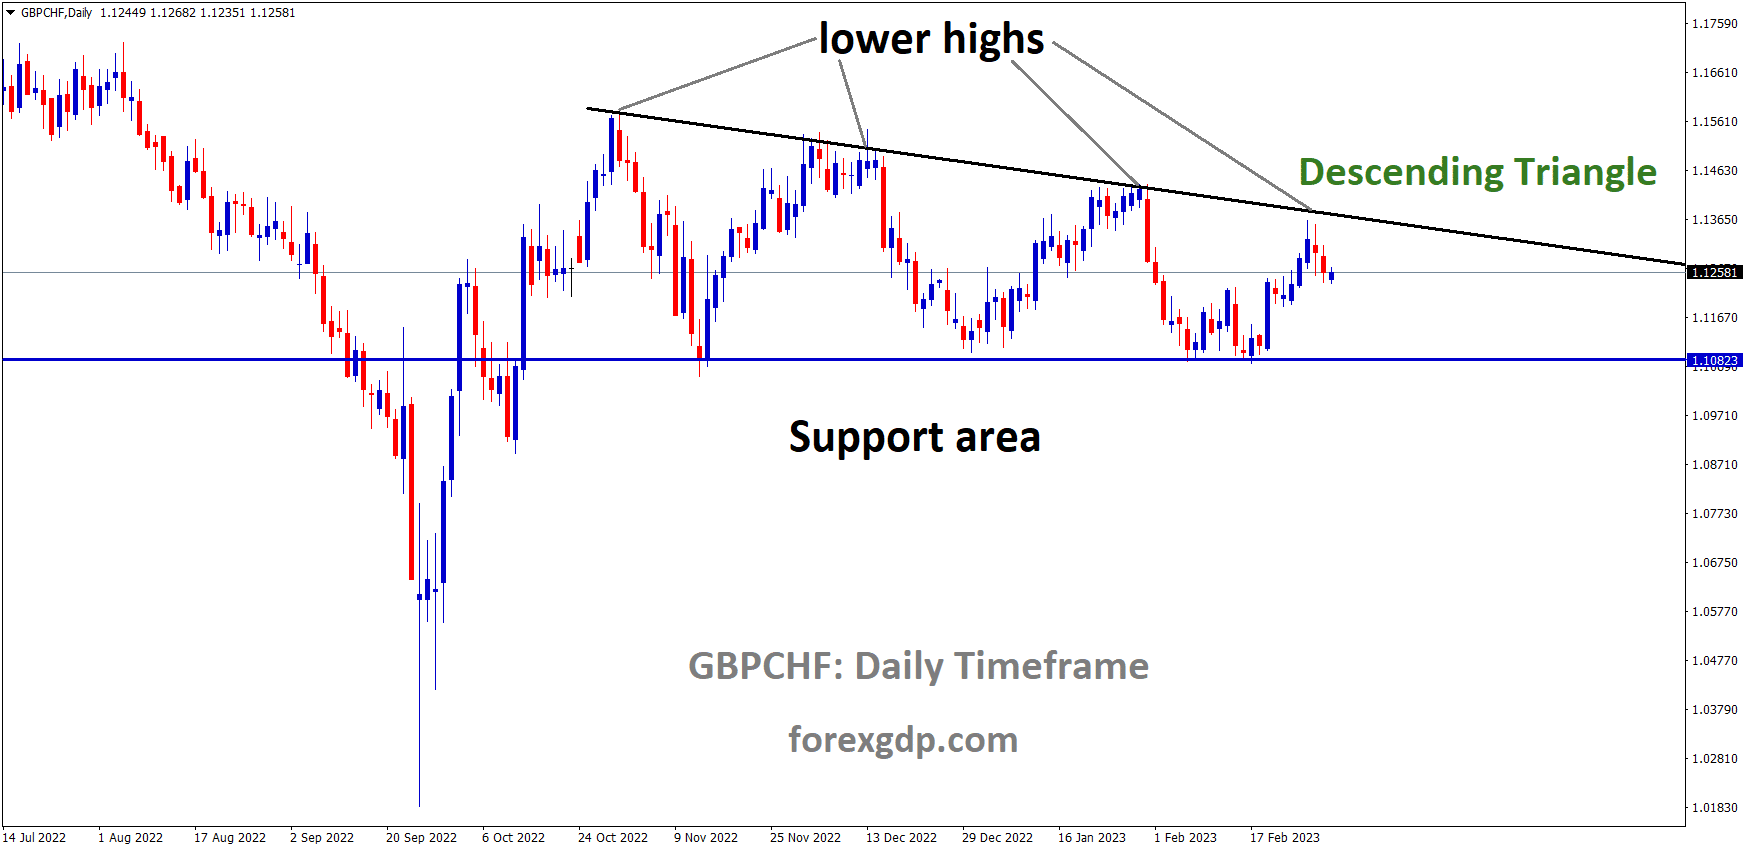 GBPCHF Daily TF analysis Market is moving in the Descending triangle pattern and the market has fallen from the lower high area of the pattern